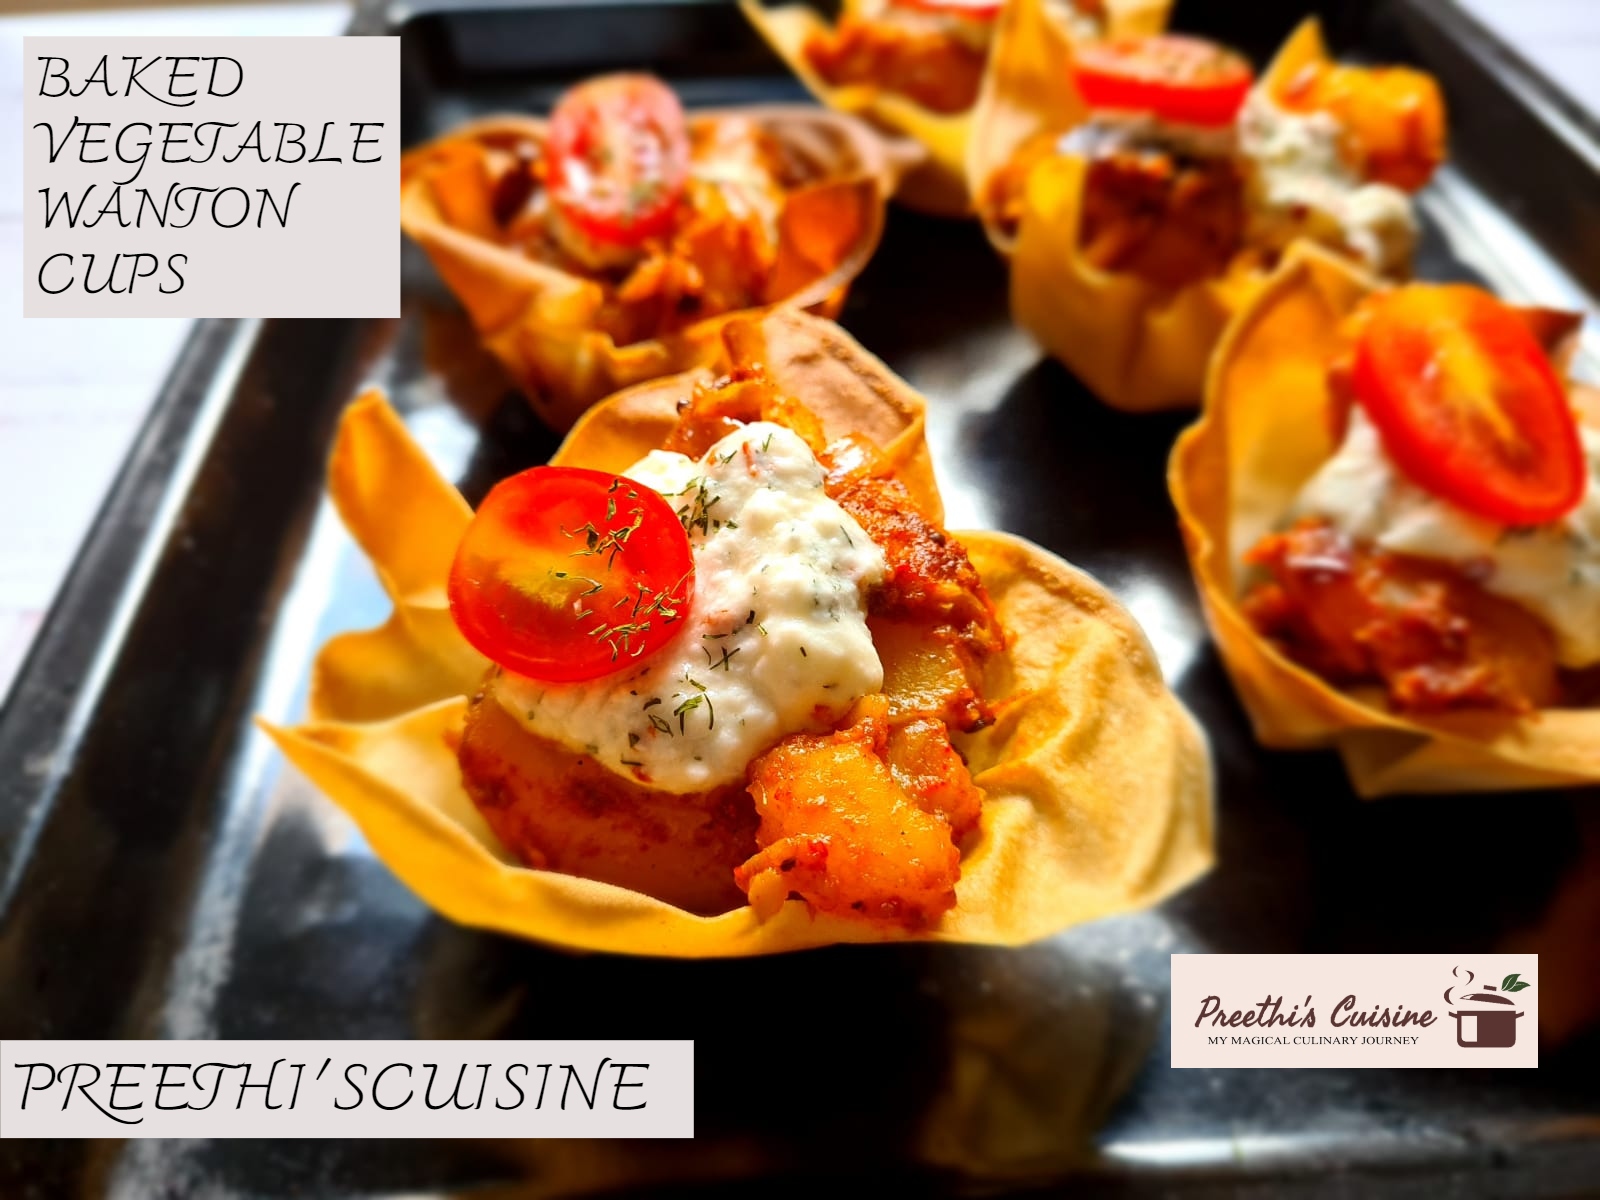 BAKED VEGETABLE WANTON CUPS